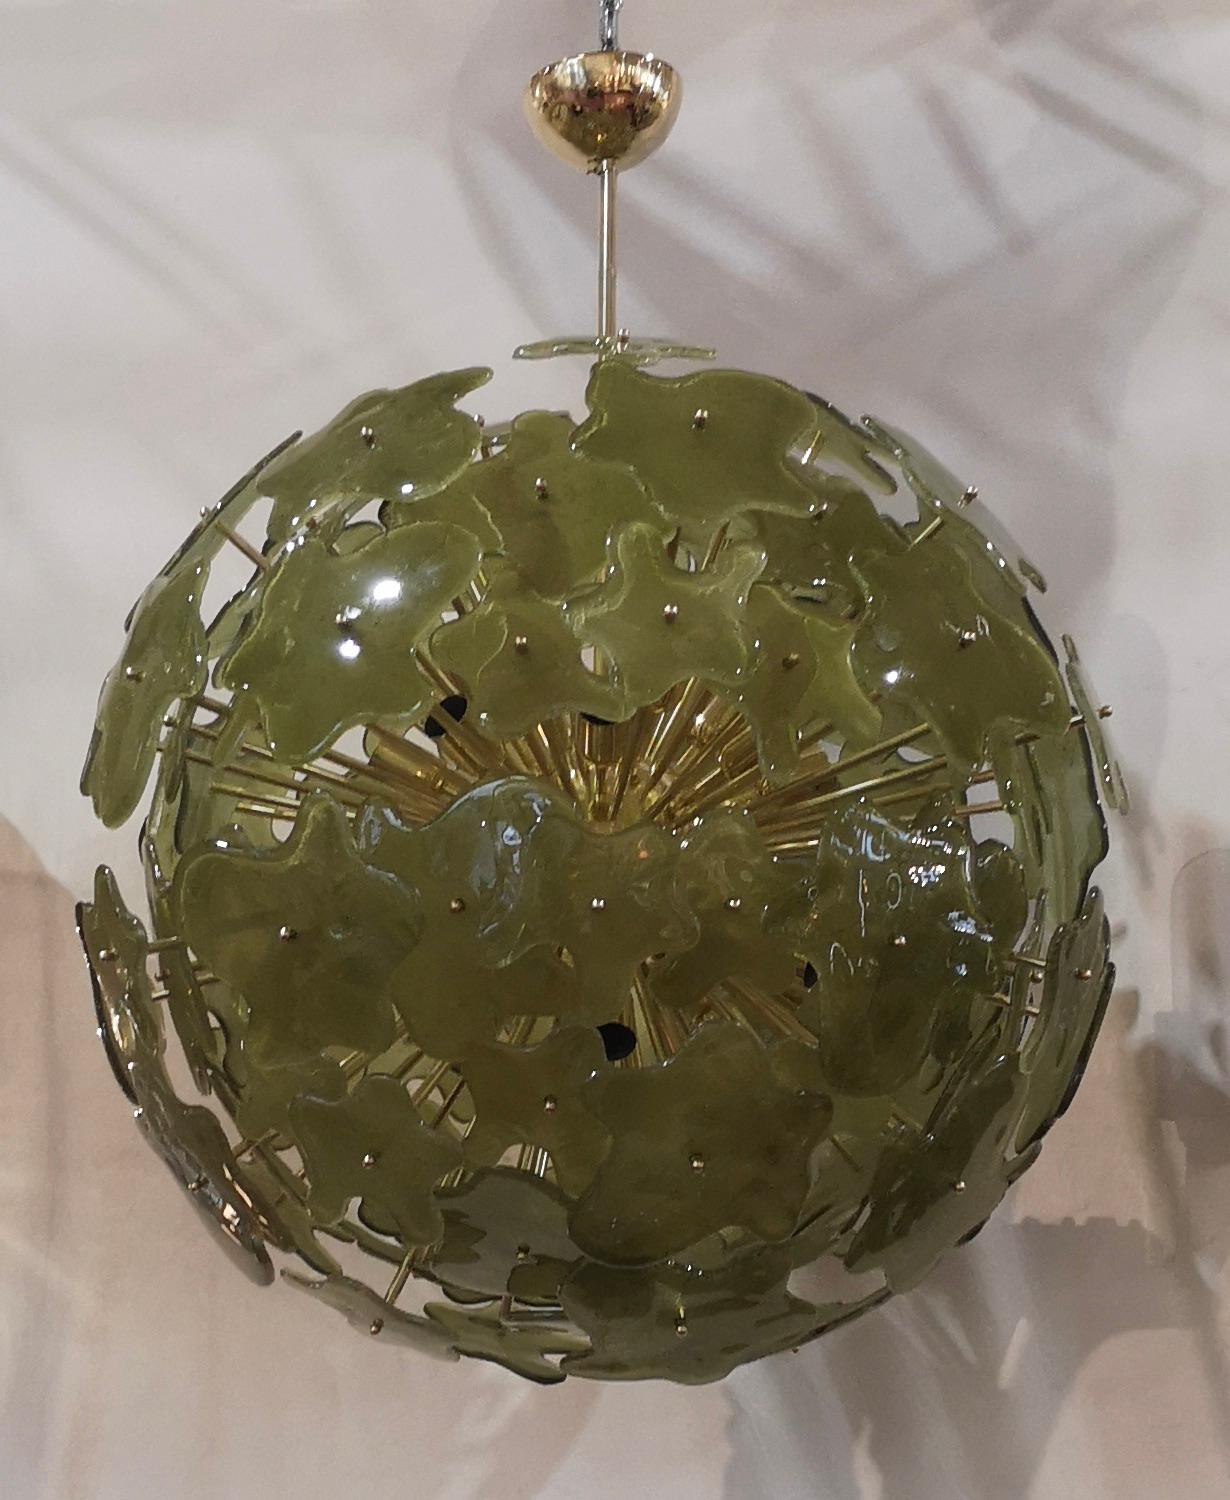 A fantastic spot of green color, amazing design due to its very particular shape of these green glass flowers and for the fantastic brass rods. Very elegant, will furnish and decorate your whole room.

Made of a large central sphere in which brass